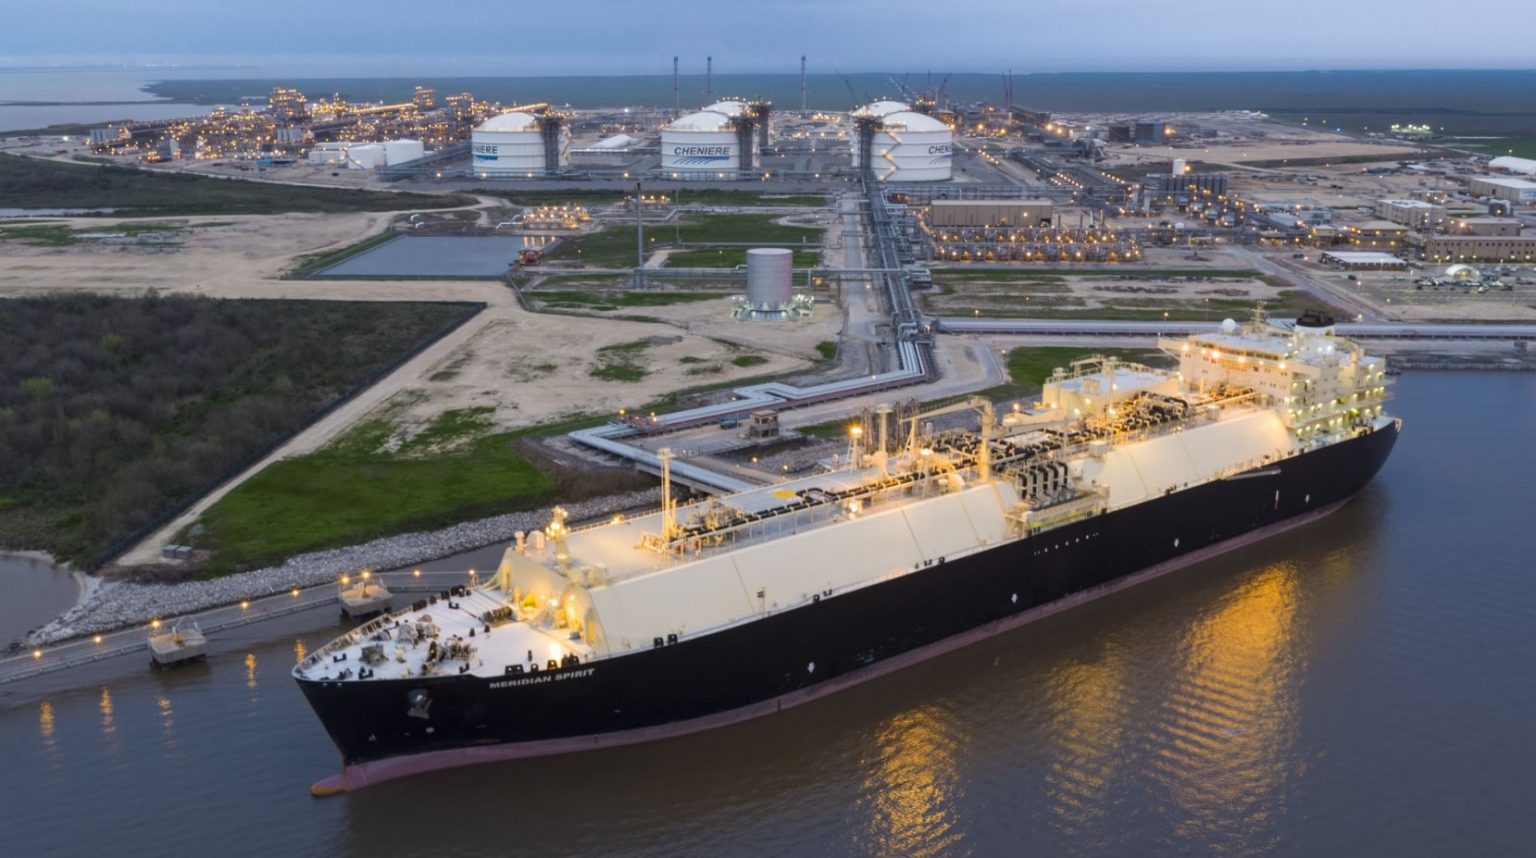 EIA says US LNG exports to exceed pipeline gas this year